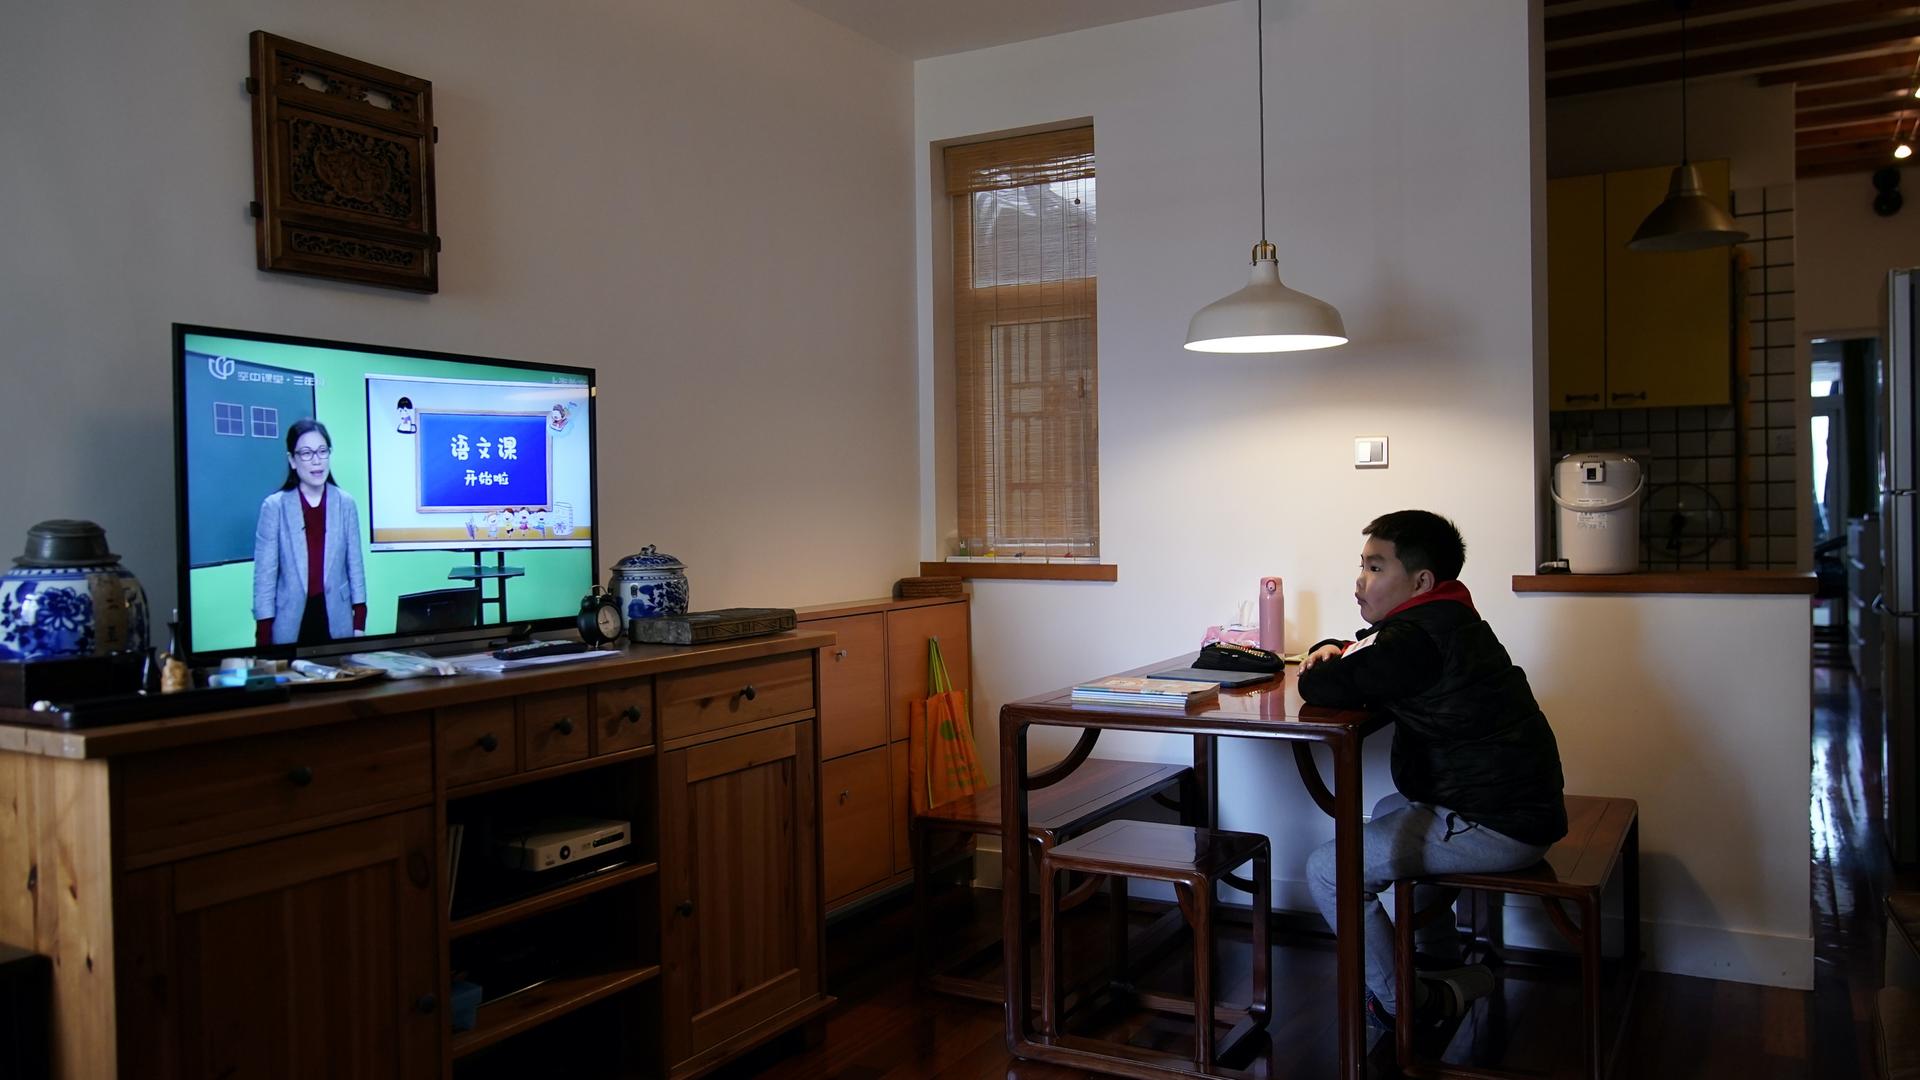 A boy sits in a living room at a desk and watches a TV with a lesson airing on it. 